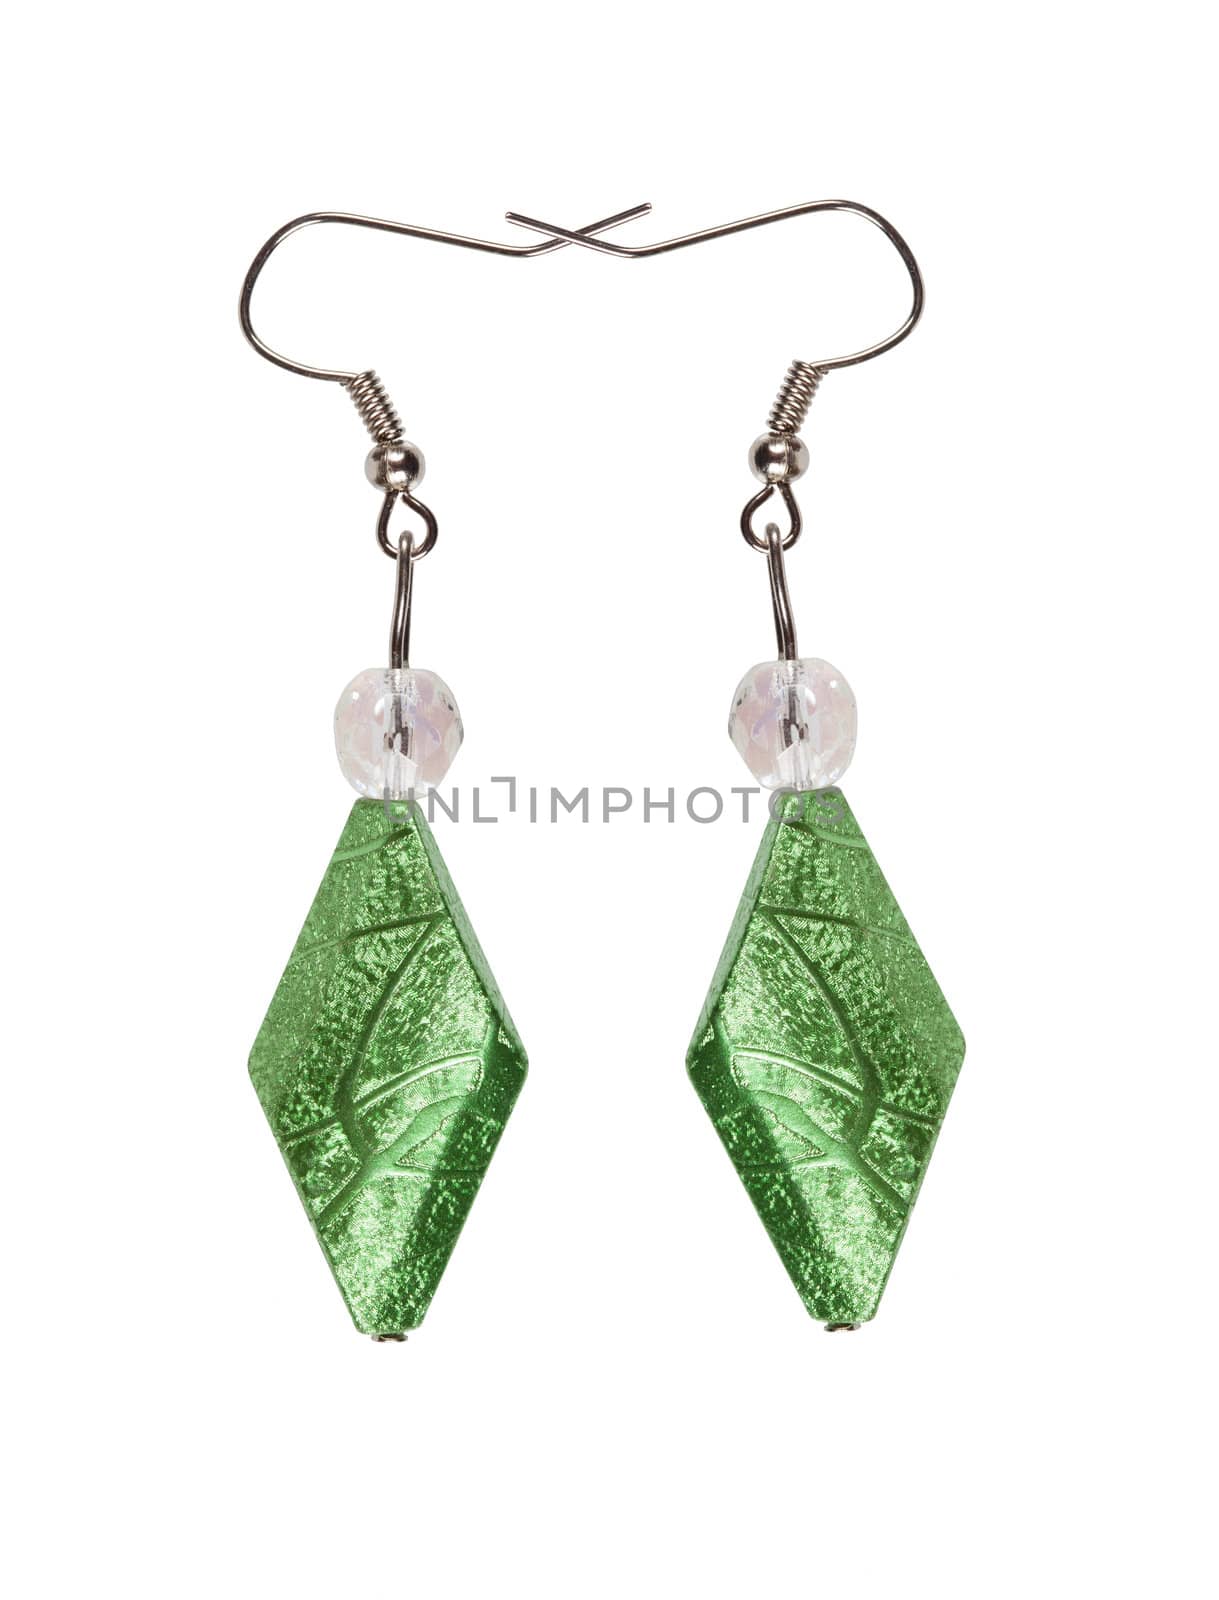 Earrings in silver diamond-shaped light green on a white background. Collage.